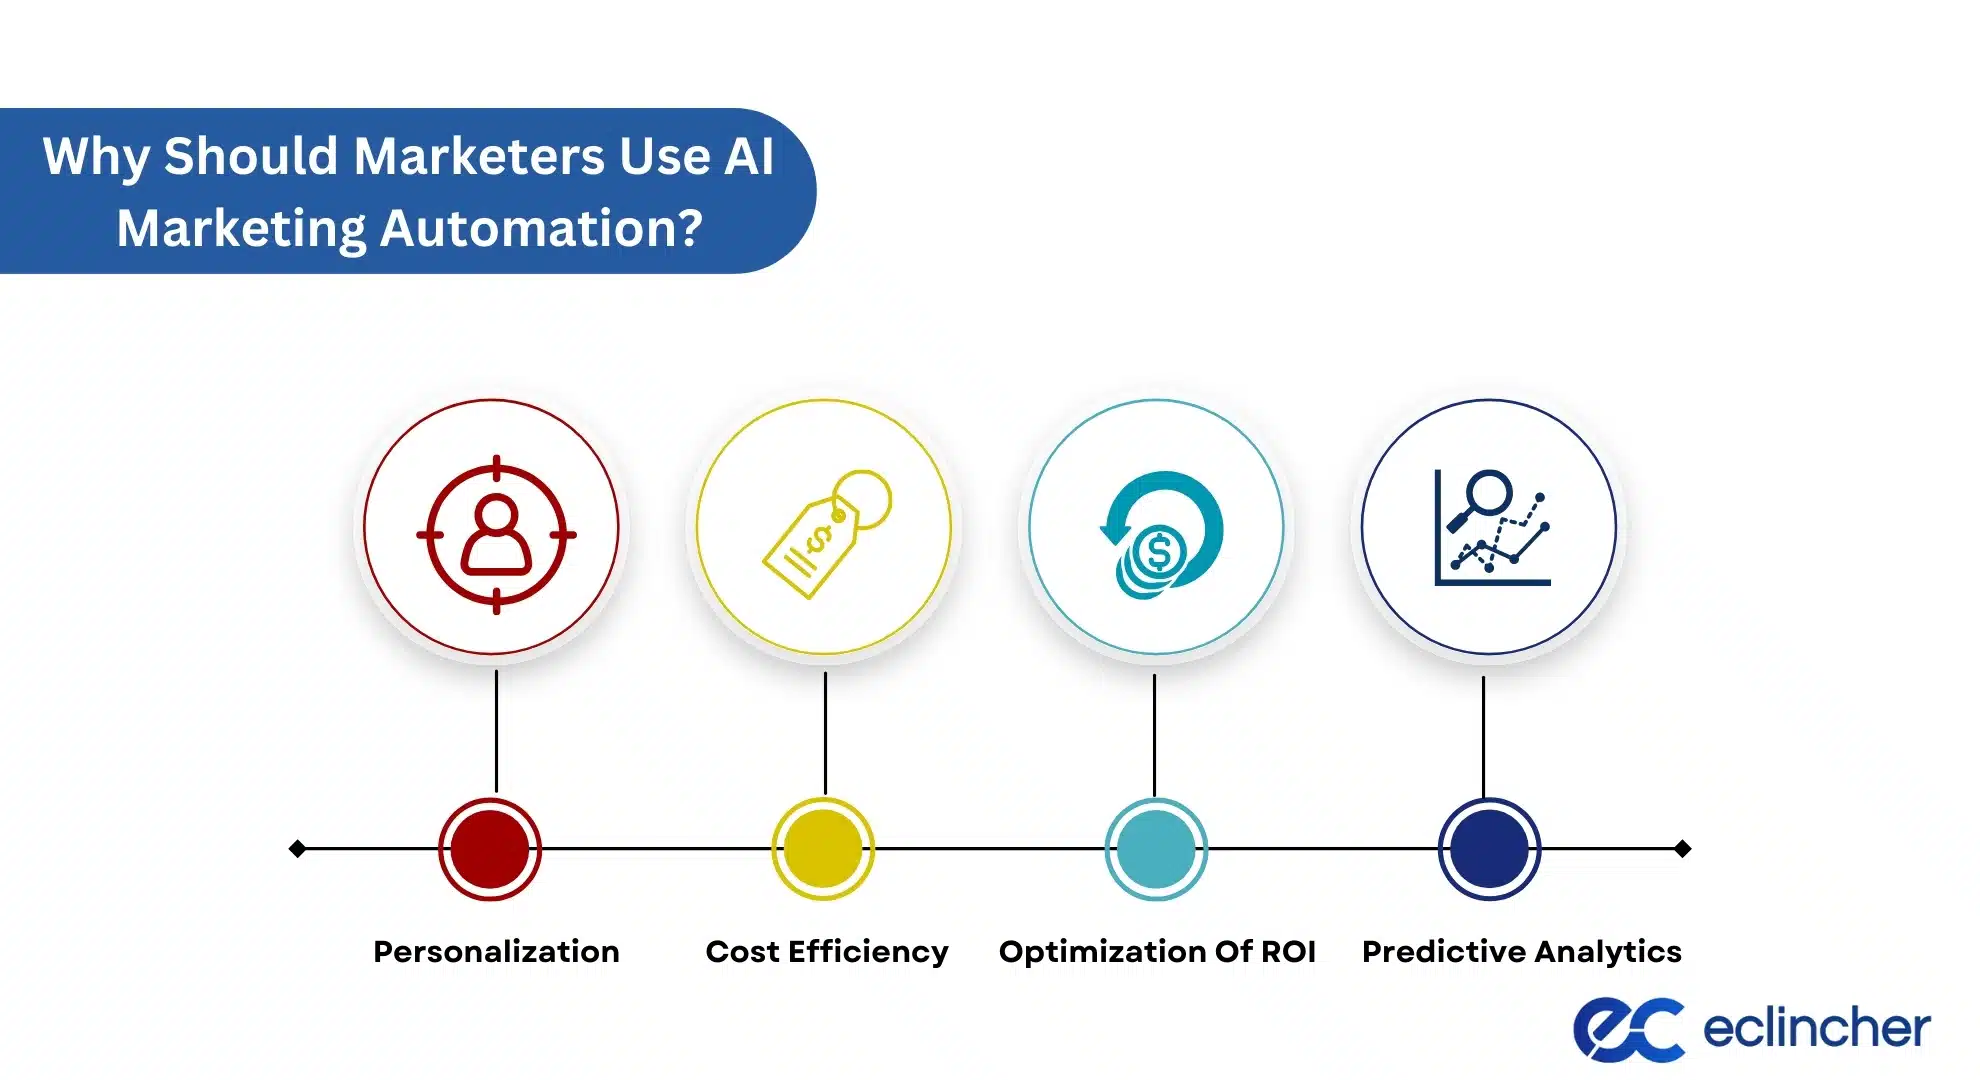 Why Should Marketers Use AI Marketing Automation